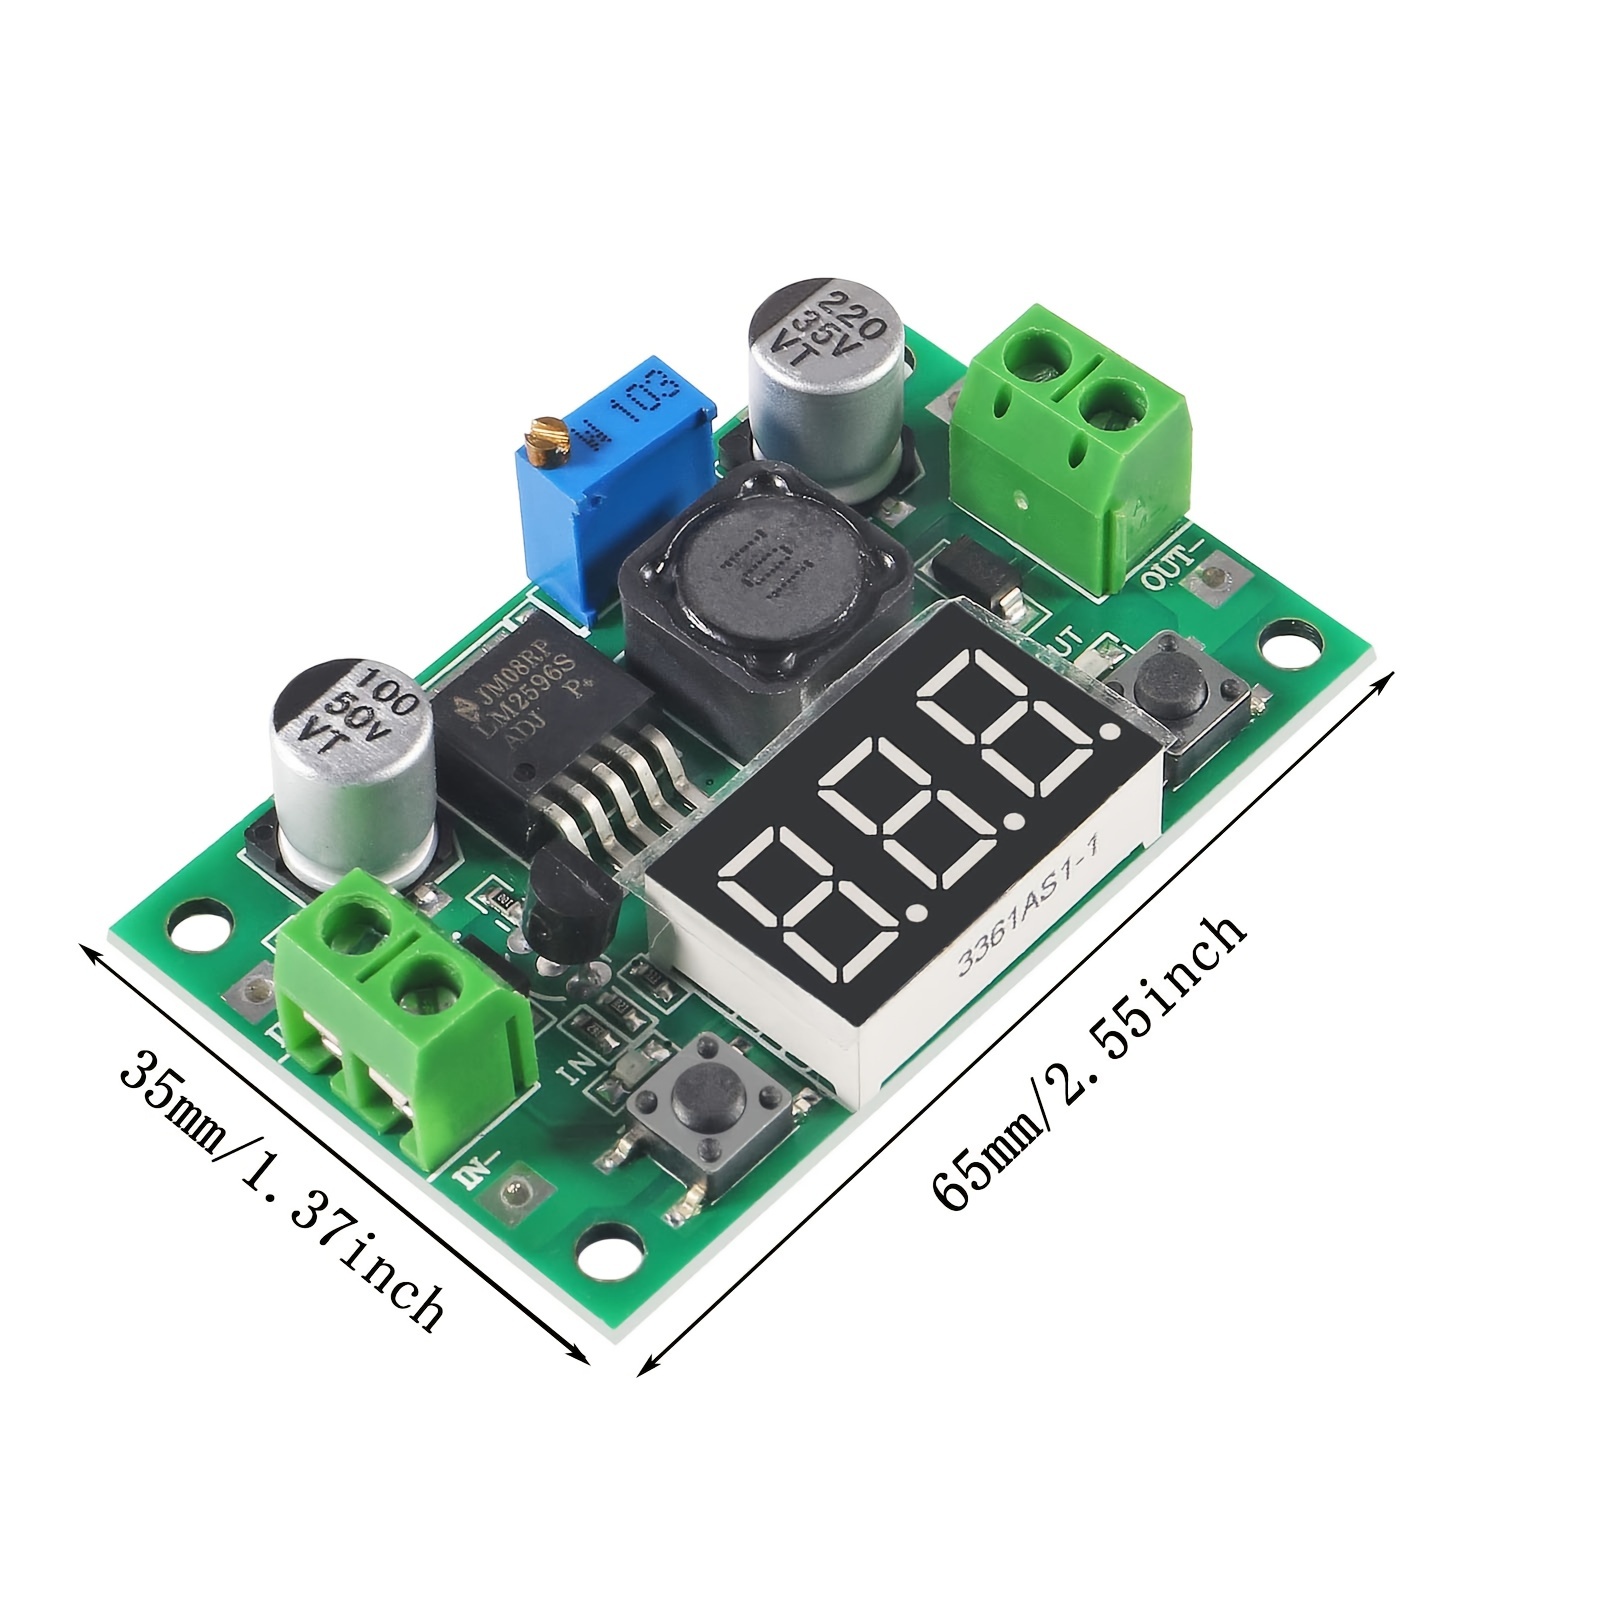 Buy LM2596 2A DC-DC Buck Step-down Converter Module DC 4.0~40 to 1.3-37V  with LED Voltmeter online at